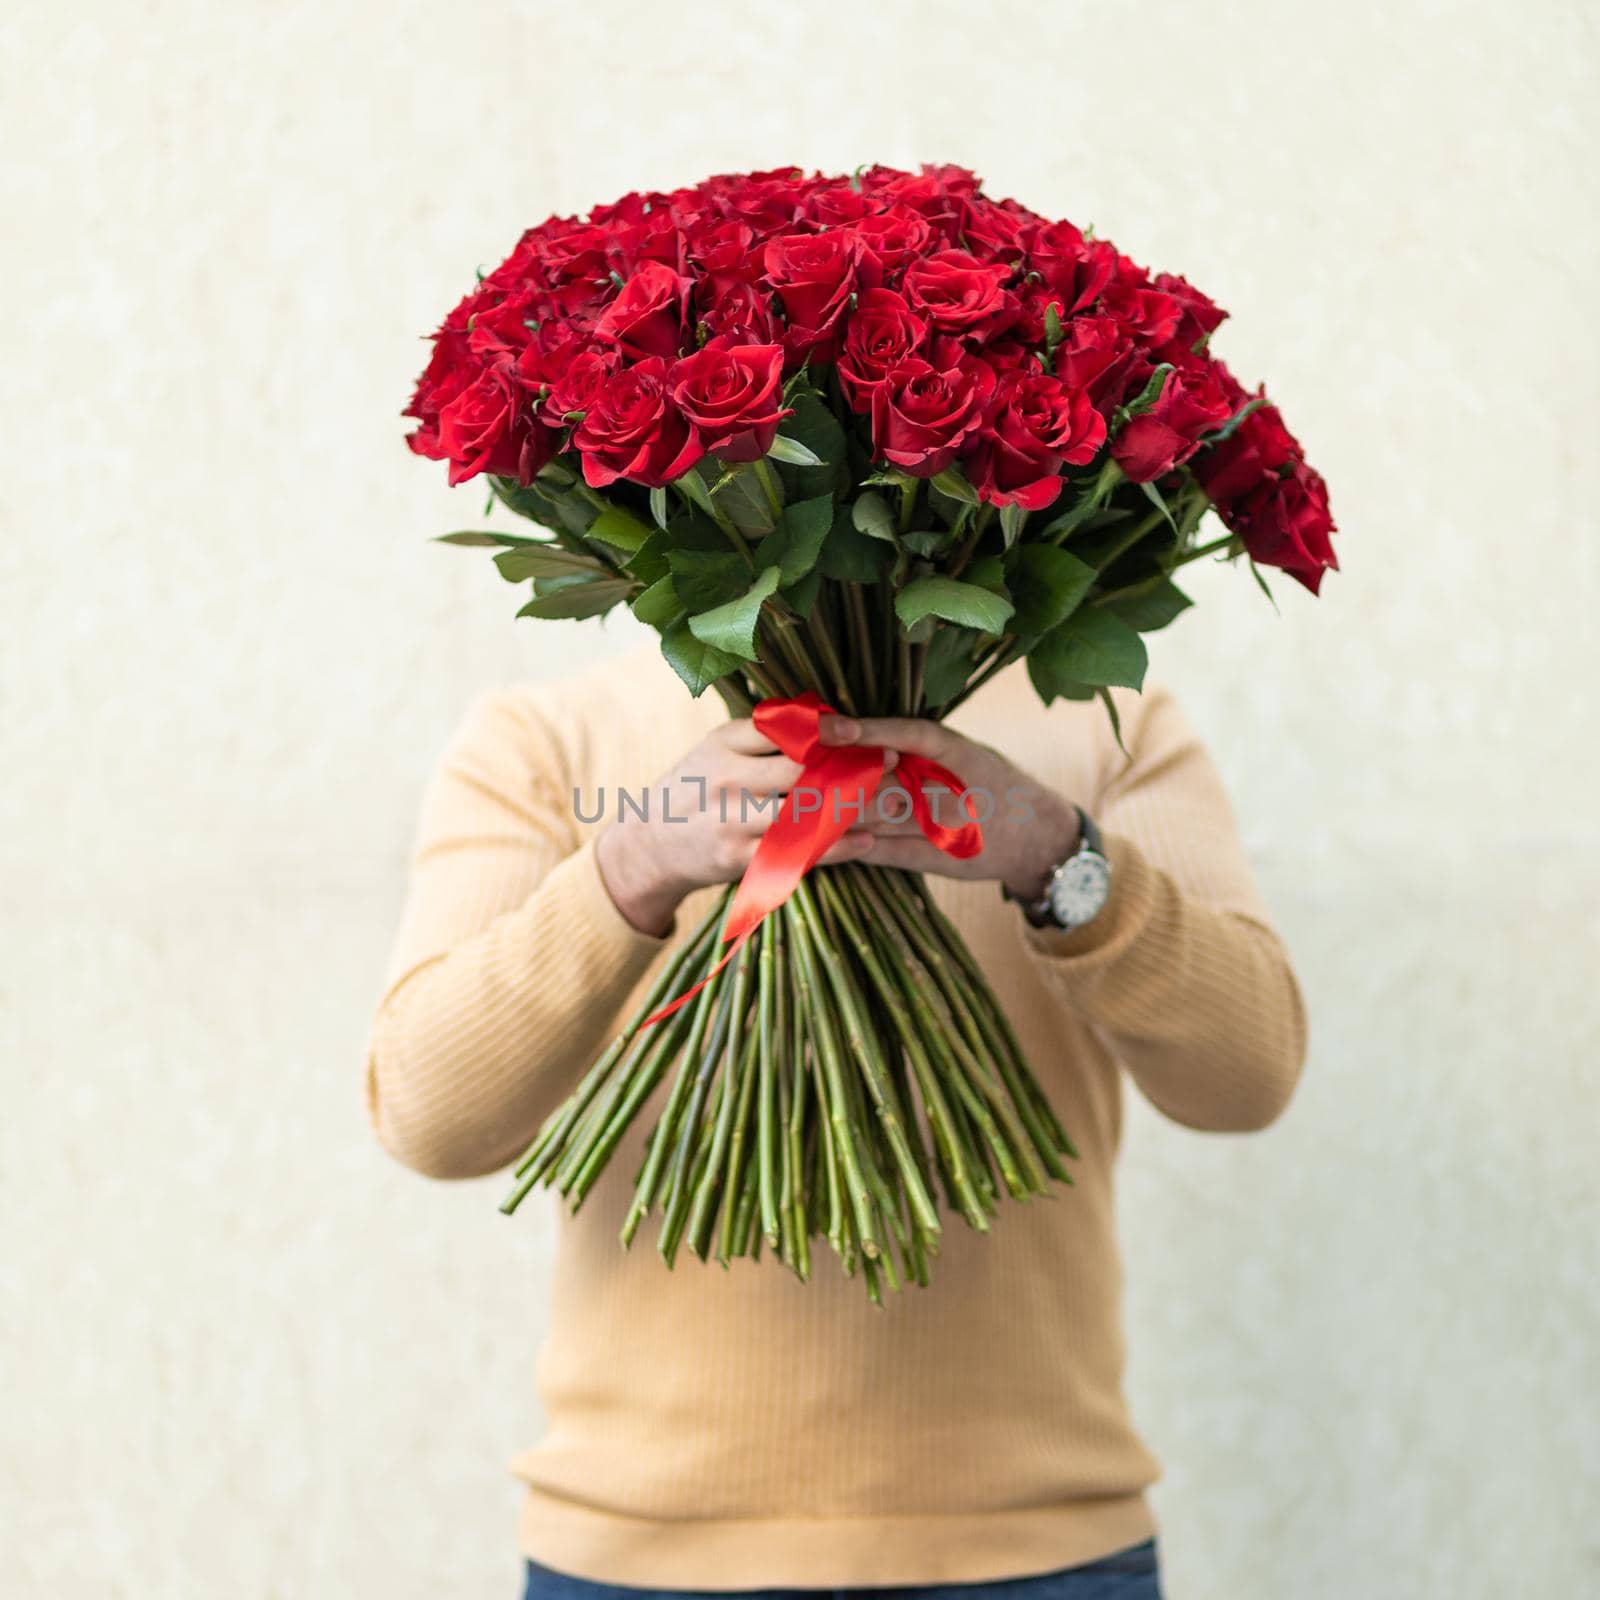 Man holding red rose bouquet by ferhad